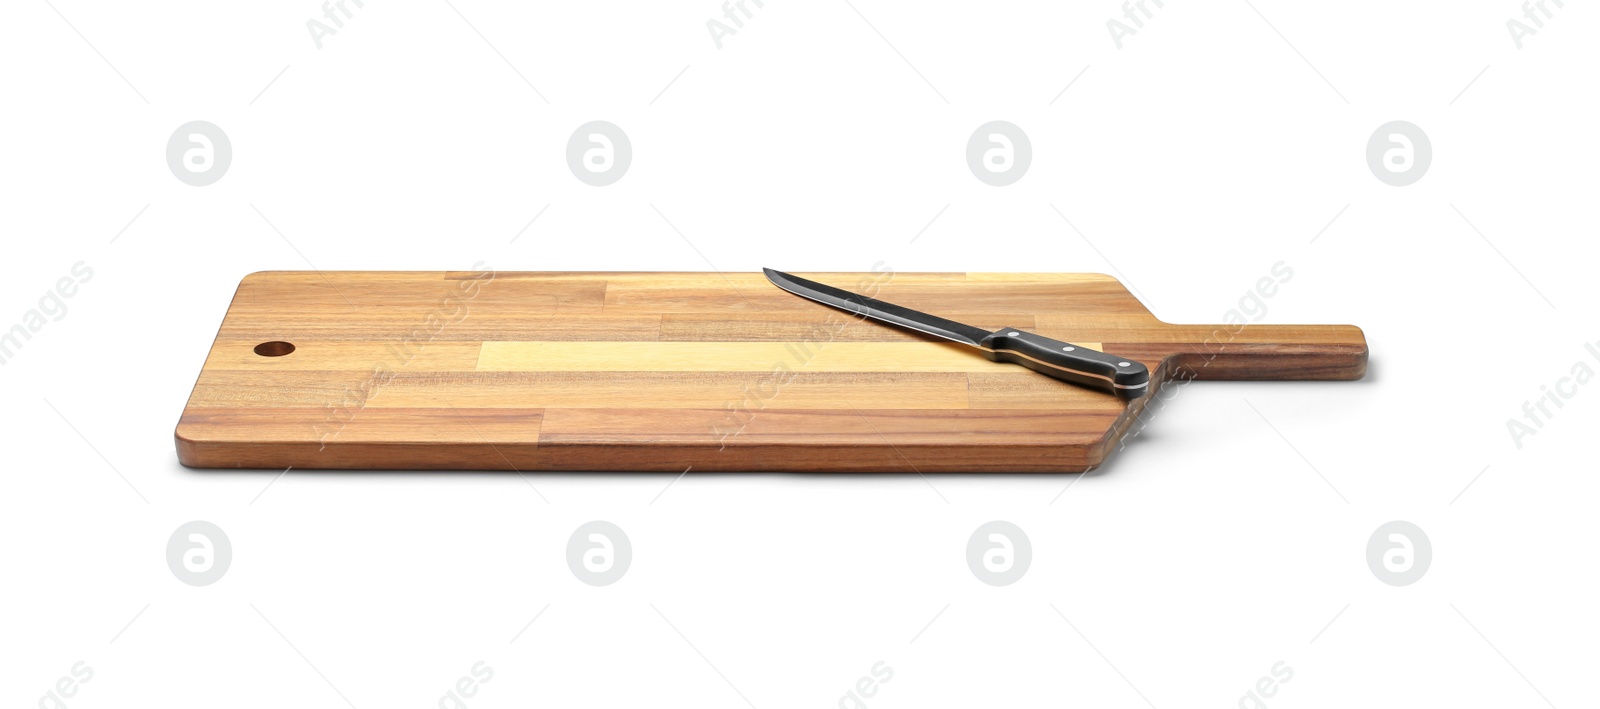 Photo of Stainless steel carving knife with plastic handle on board against white background